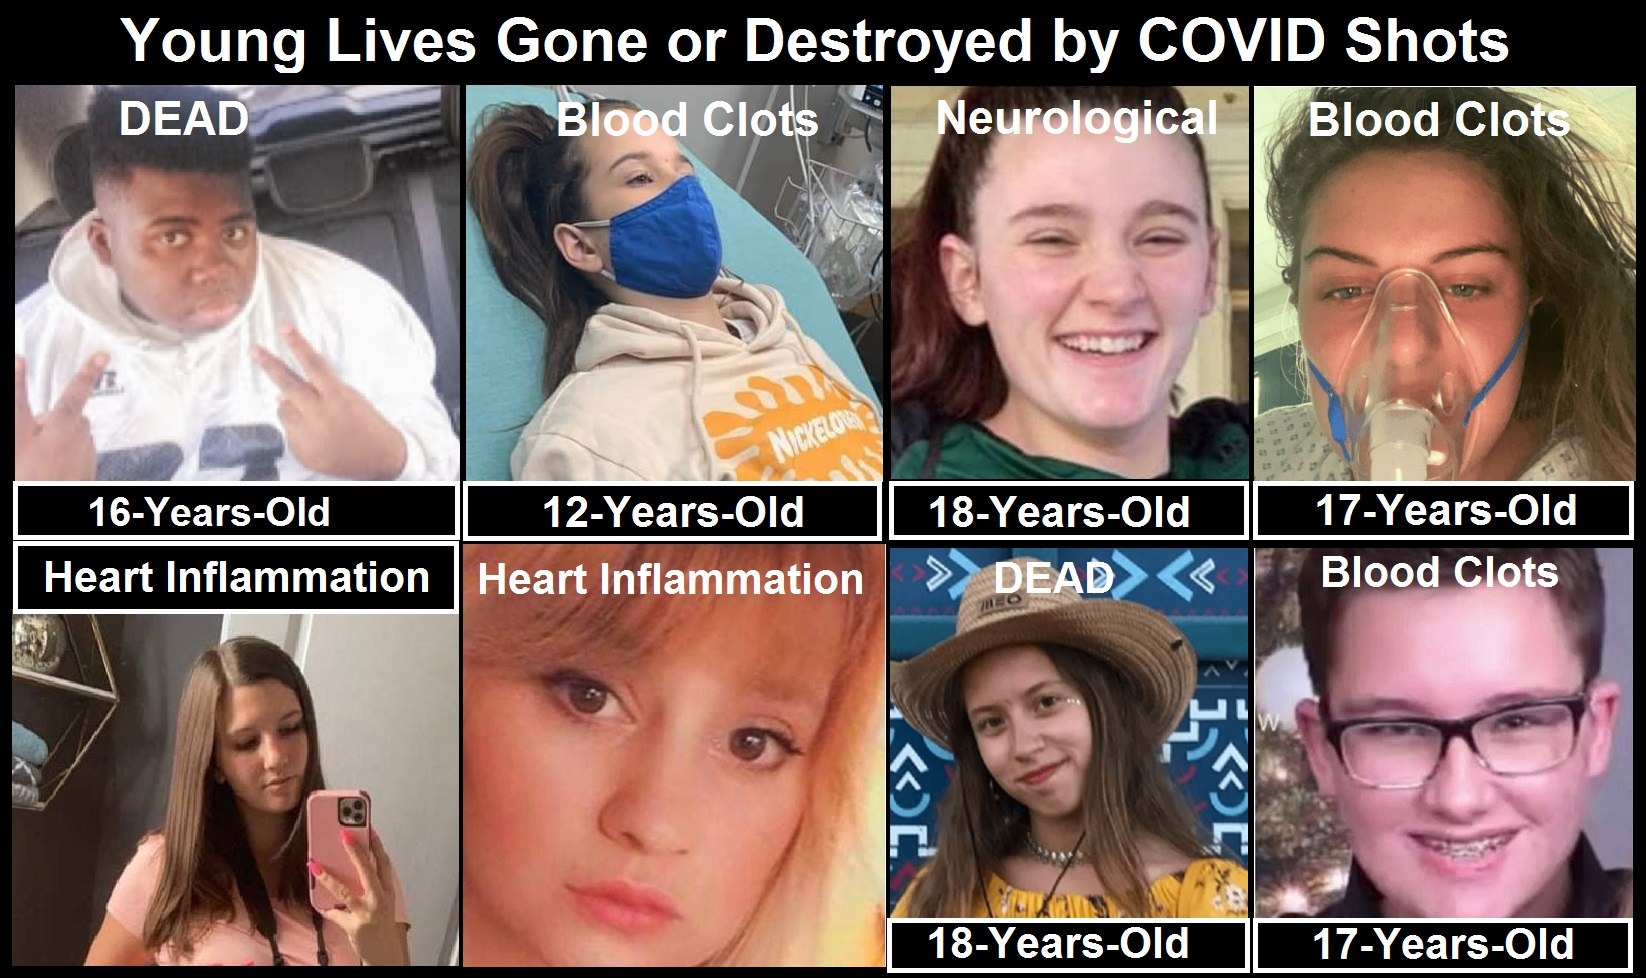 Children dying from covid shots | 76,253 dead 6,033,218 injured recorded in europe and usa following covid vaccines with 4,358 fetal deaths in u.s. | health